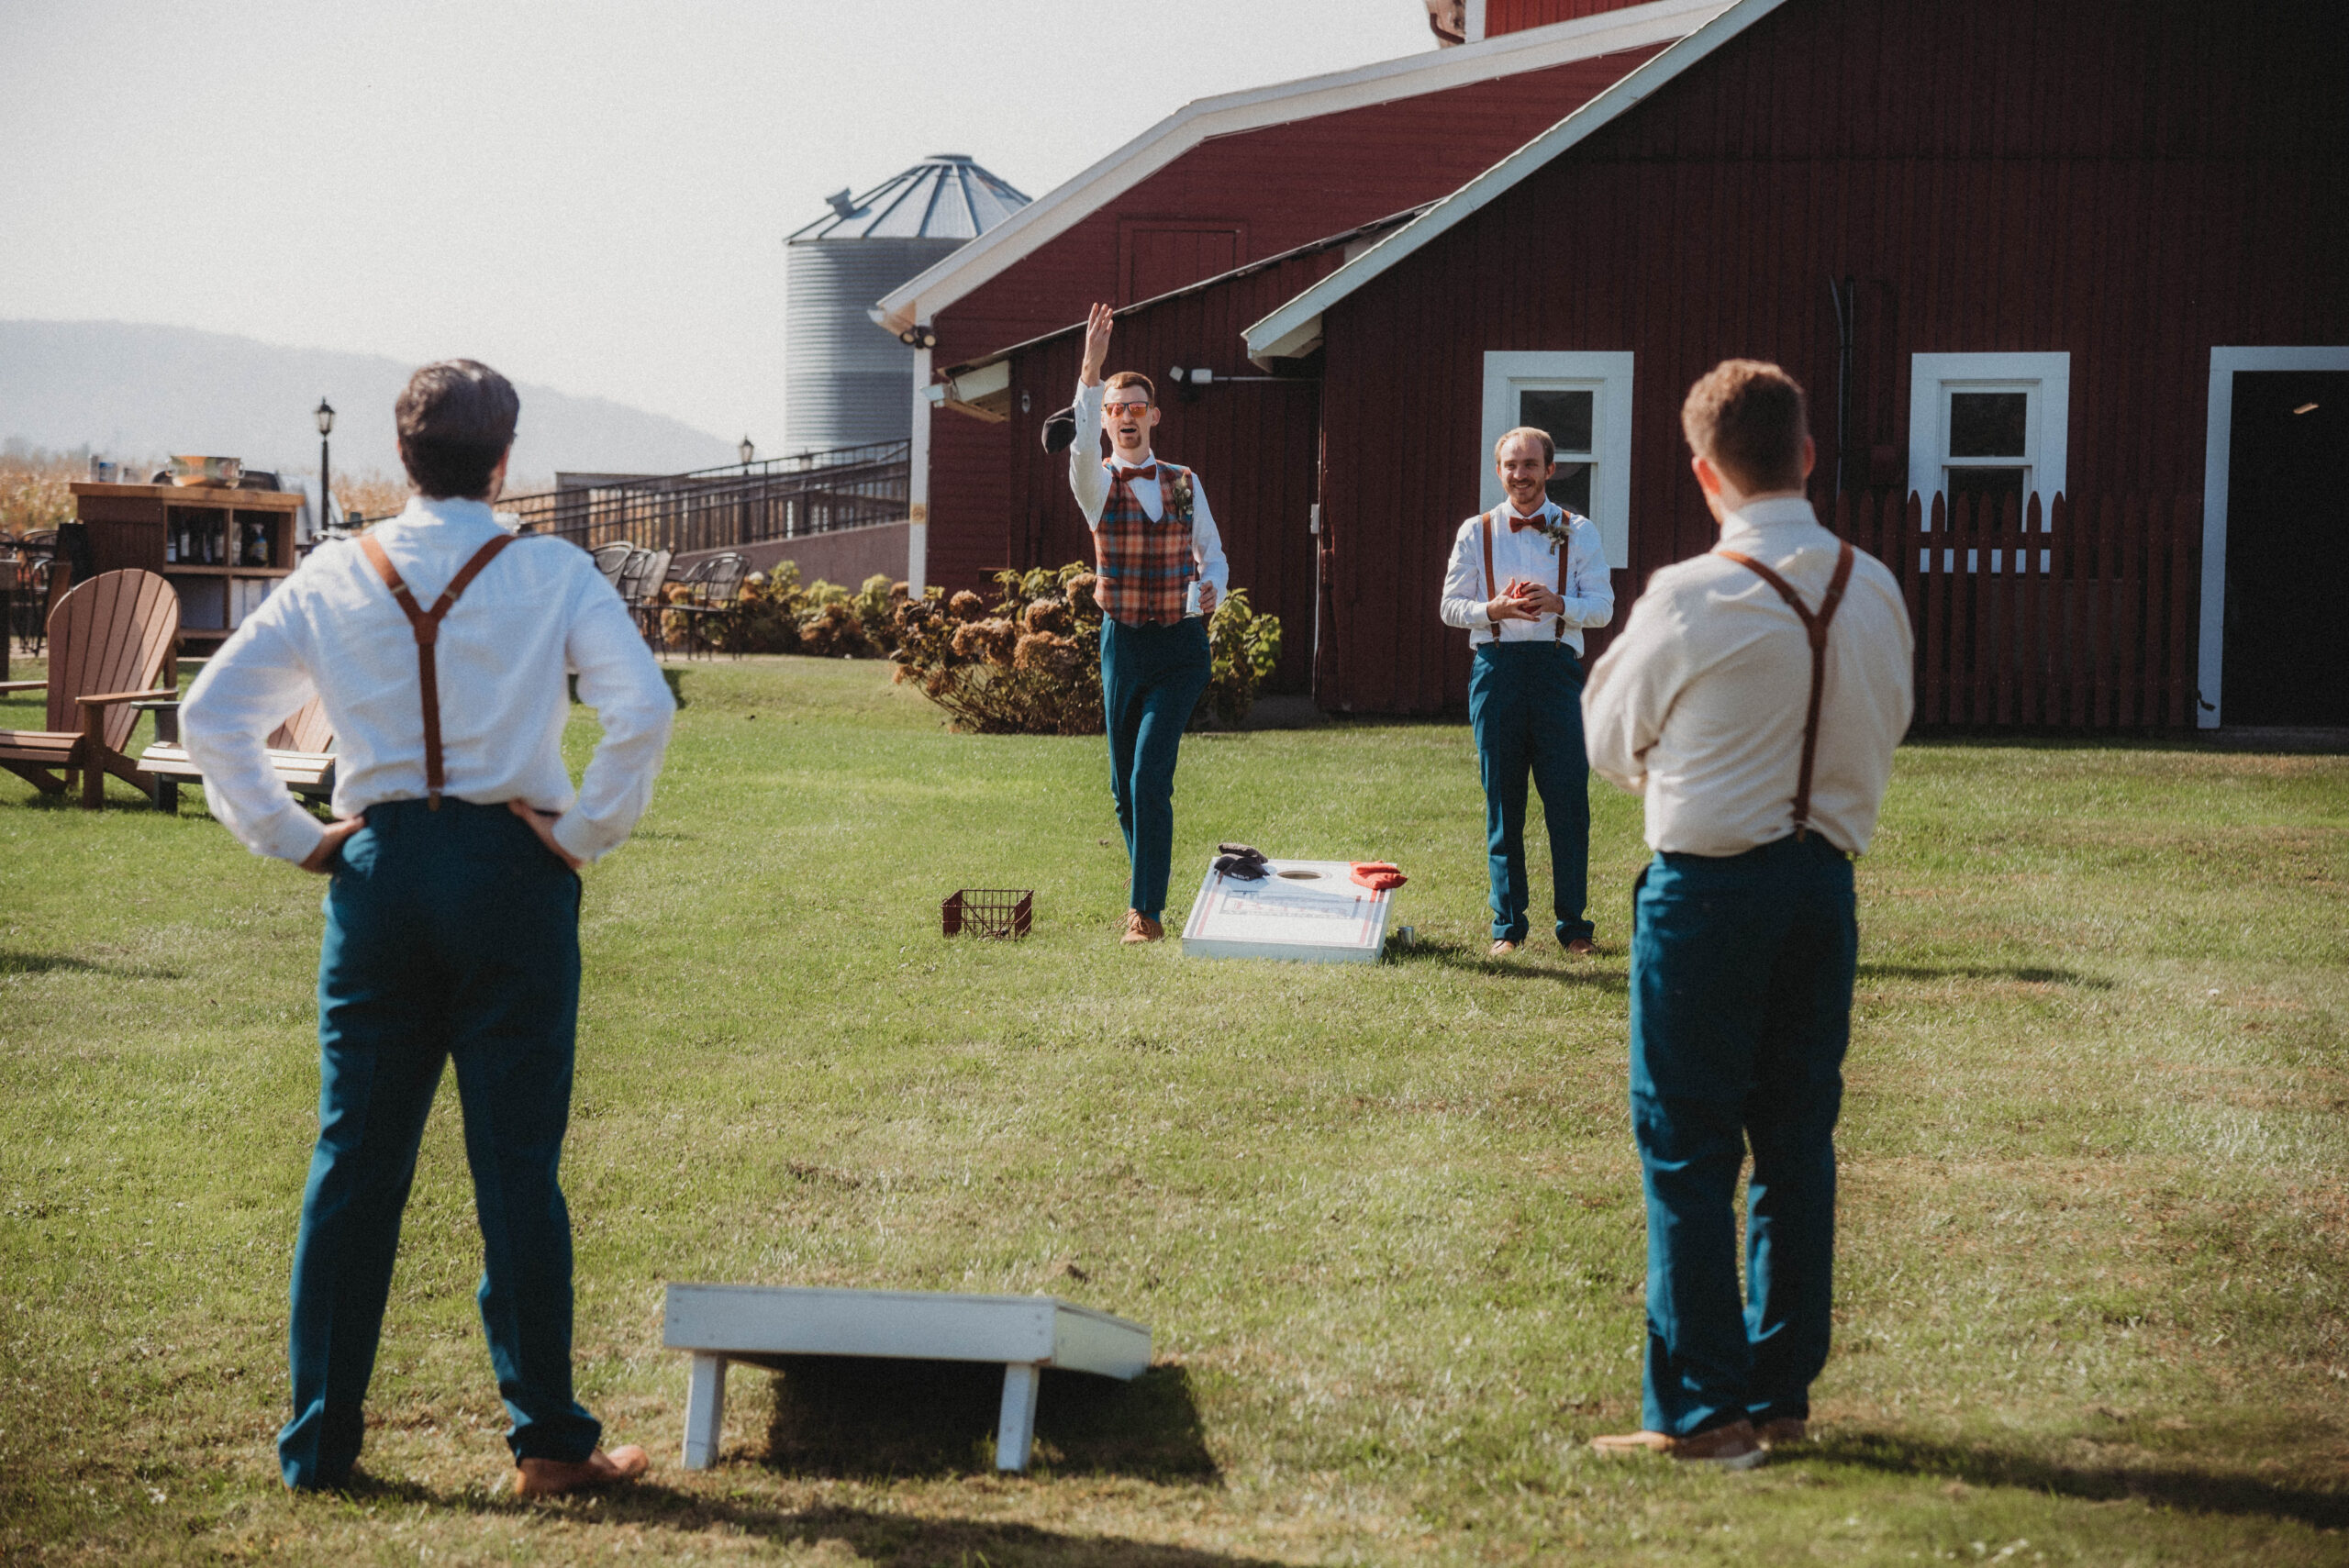 Groom and his groomsmen playing cornhole at an outdoor end of September wedding in Vermont